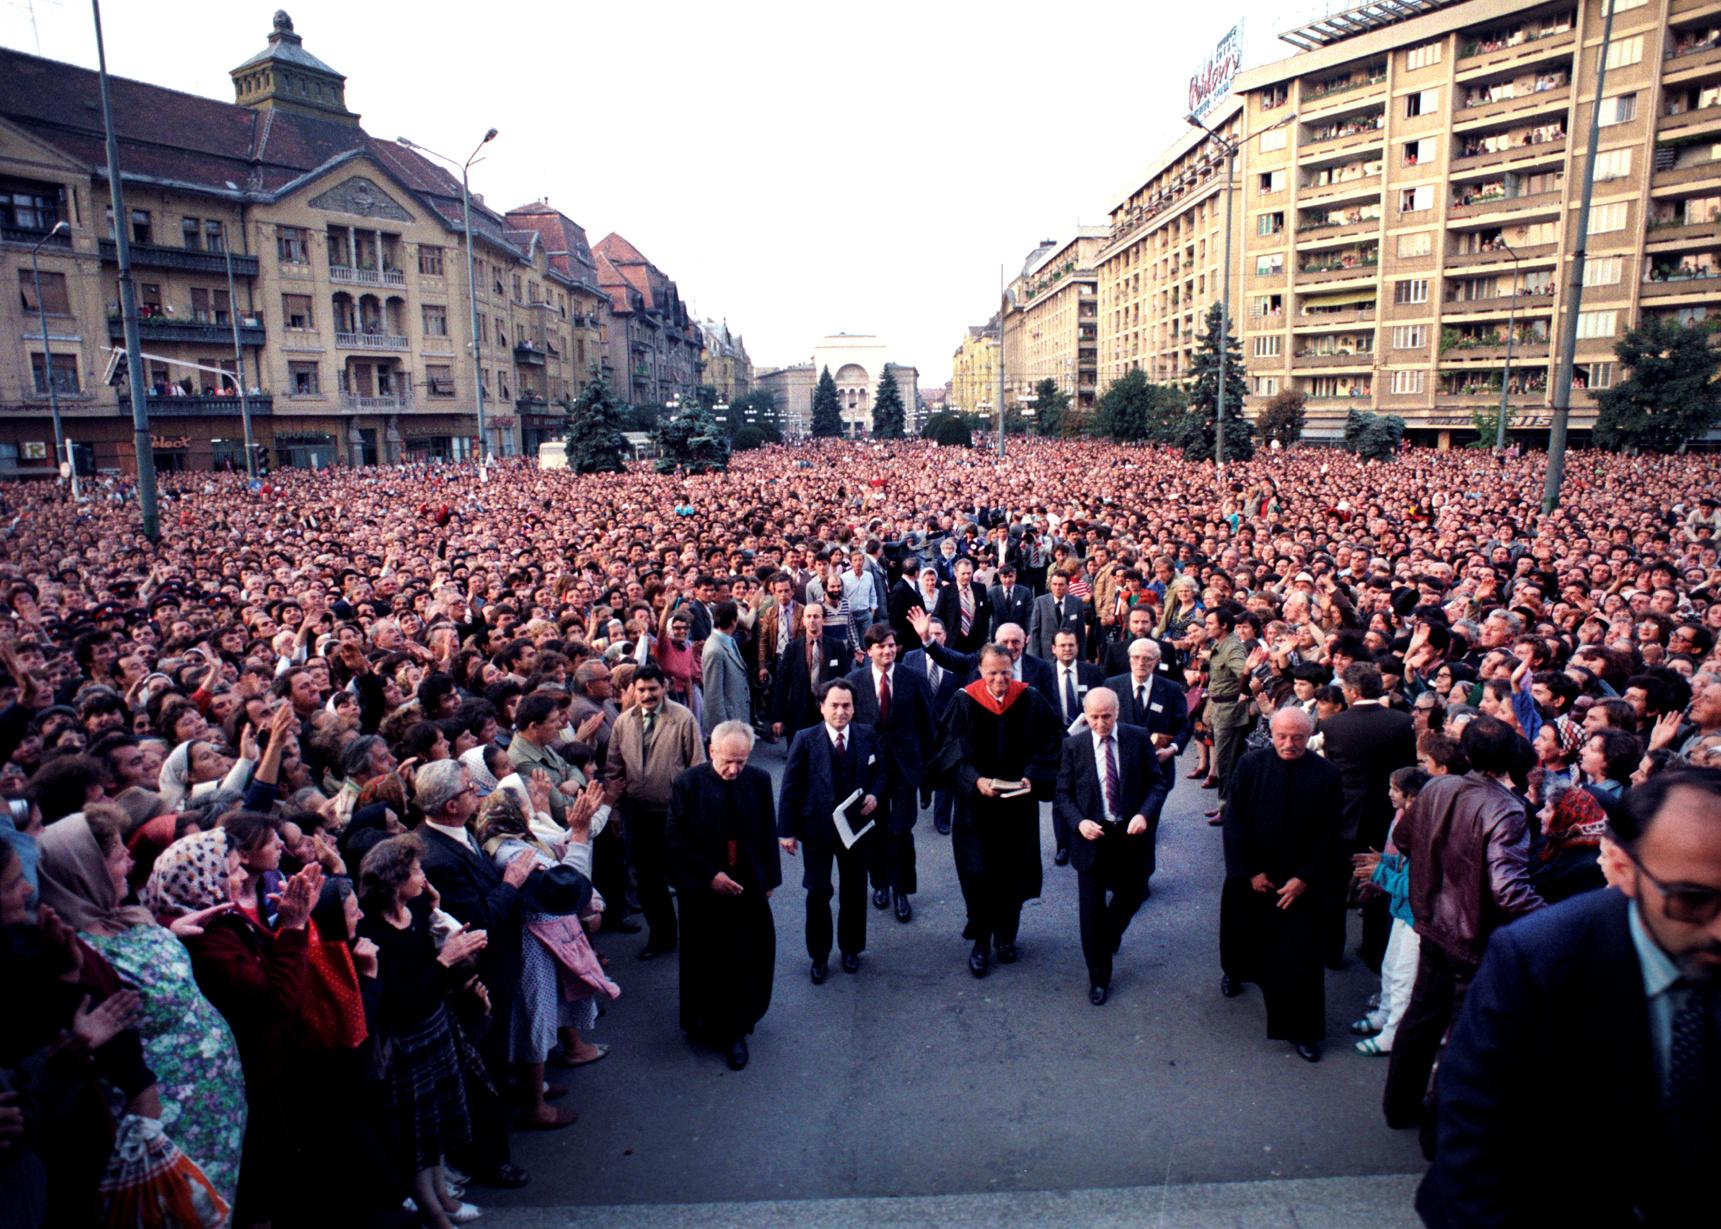 The Rev. Billy Graham, accompanied by his son Franklin, went on a seven-city trip to Romania in 1985 that was marked by crowds in excess of 100,000 at times.